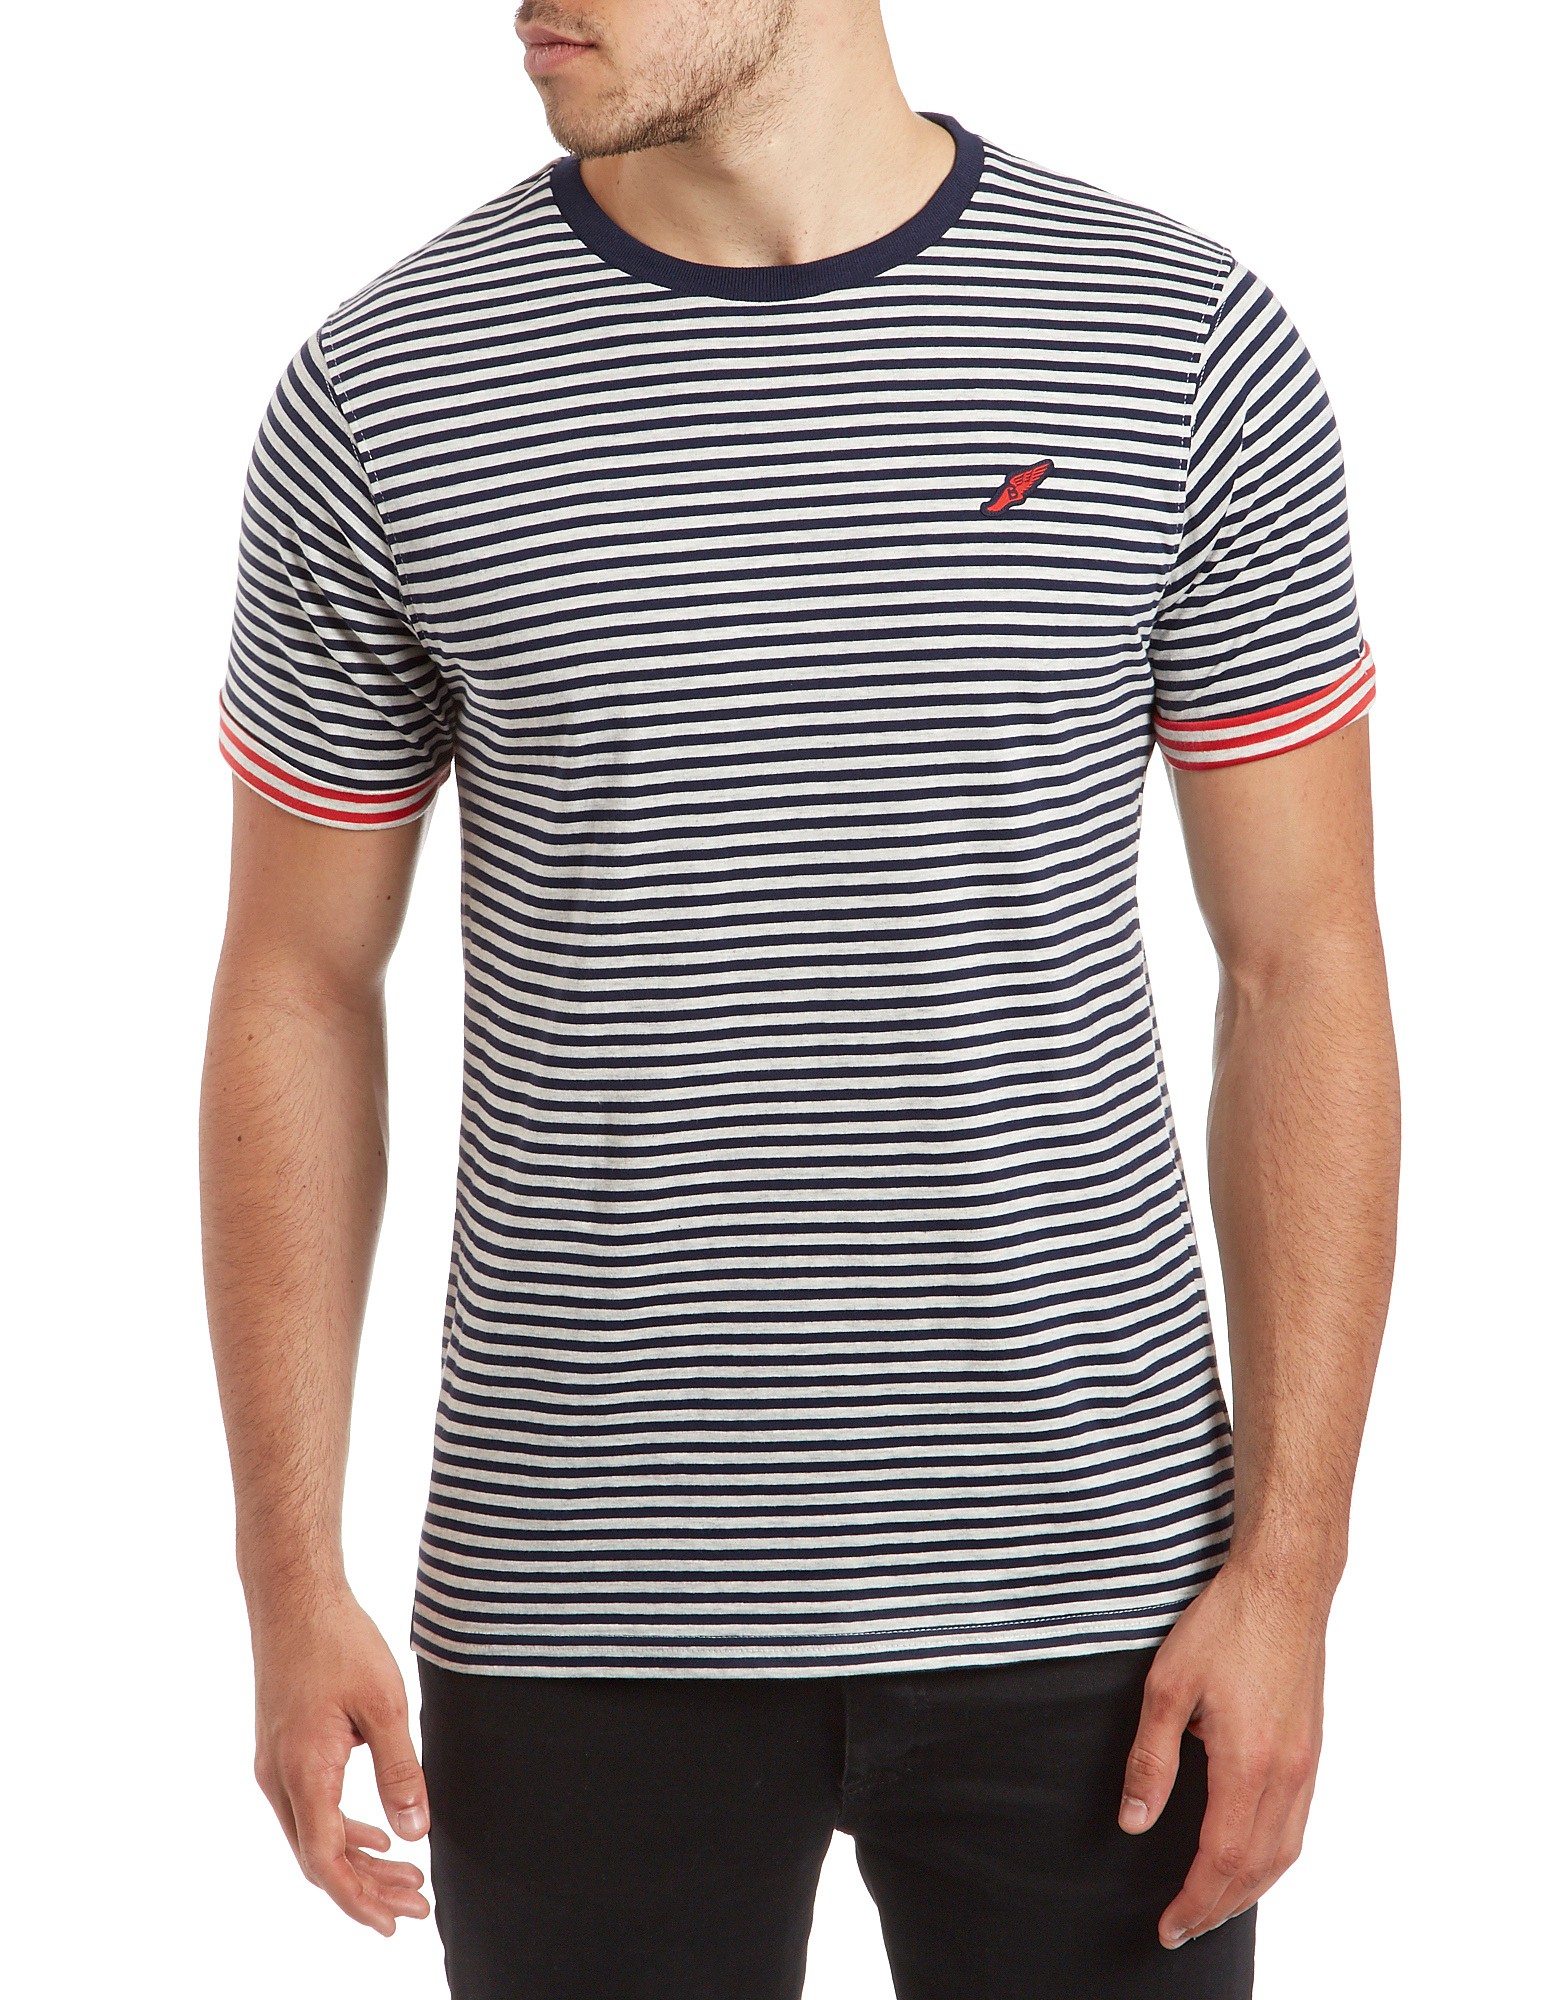 Cogswell Stripe T-Shirt